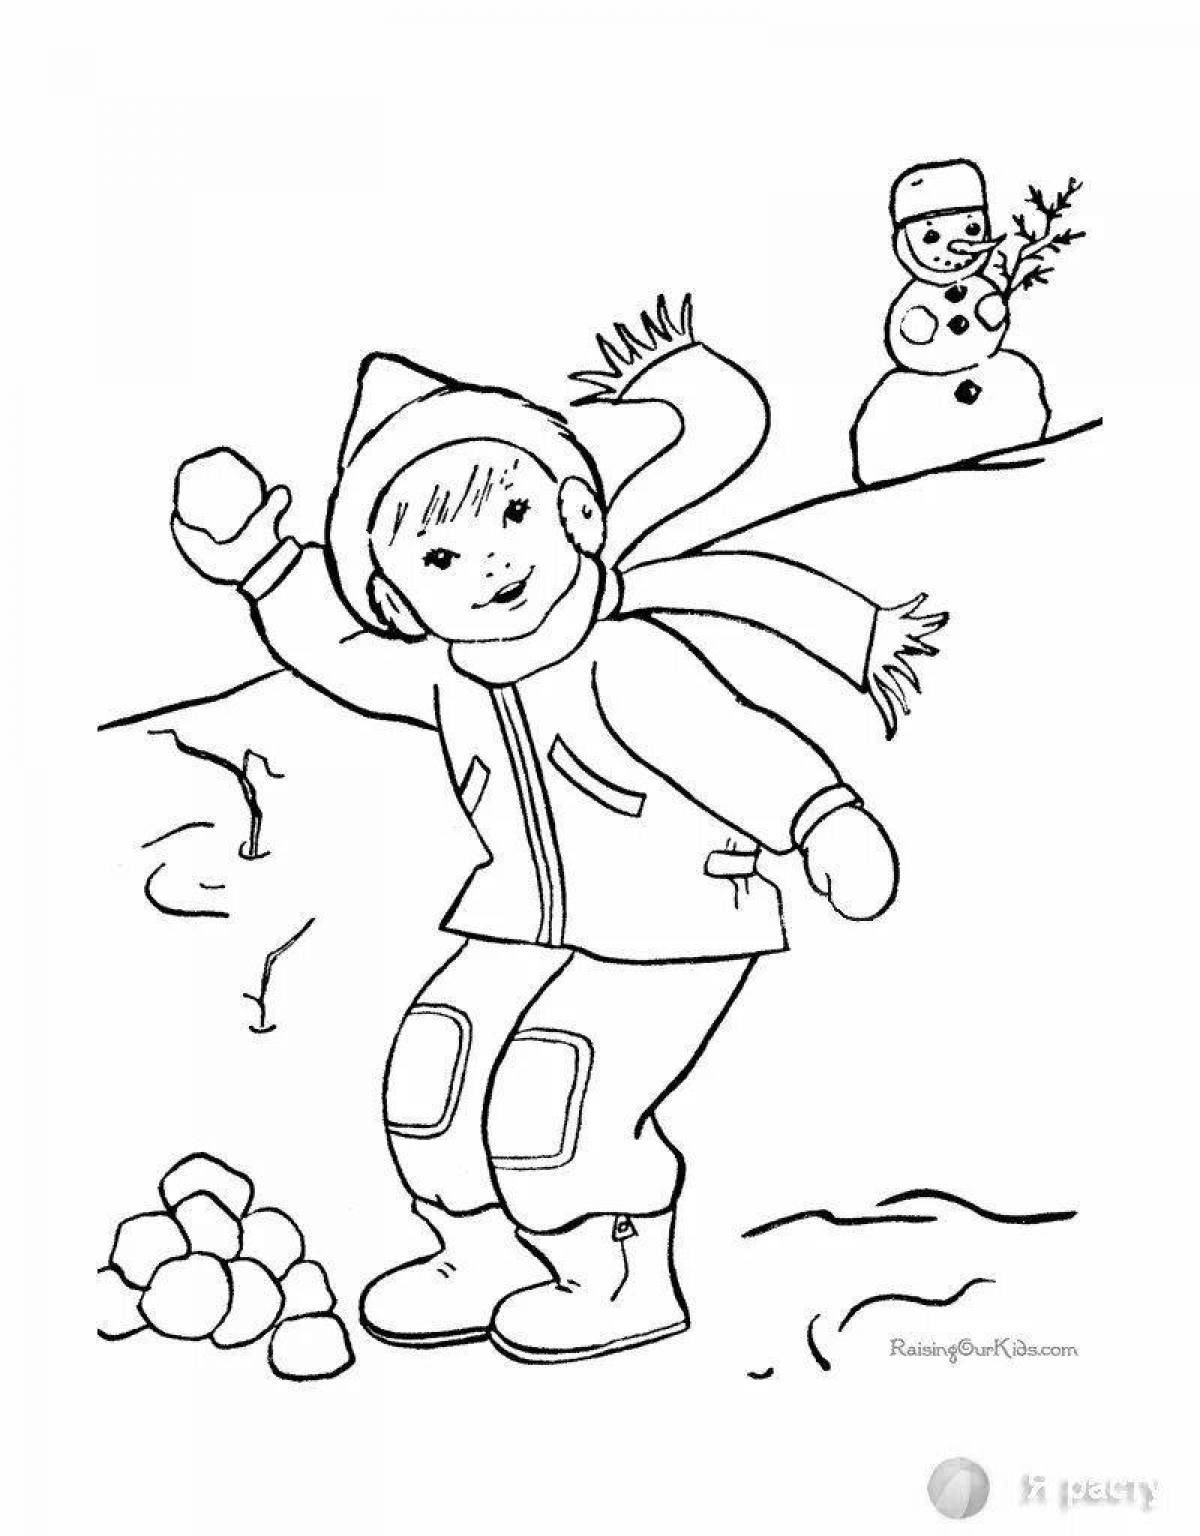 Playful winter games coloring page